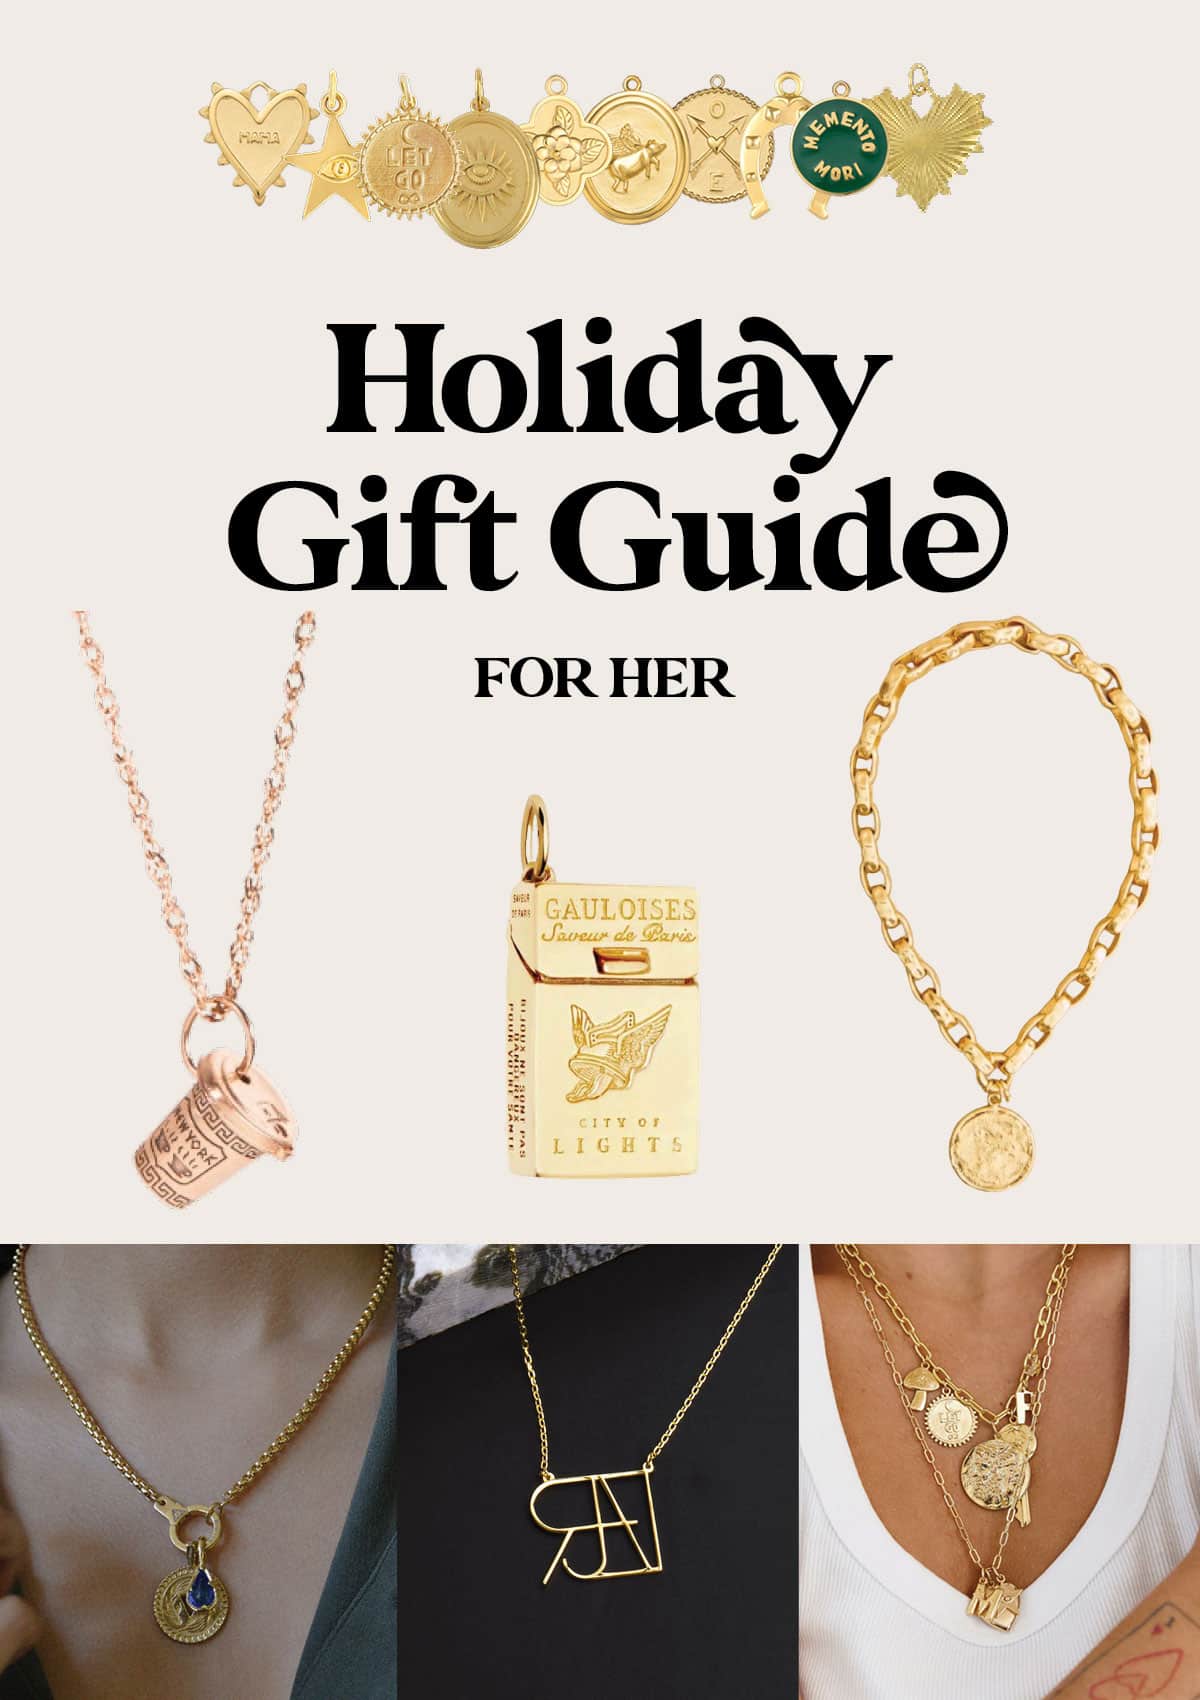 Make It More Meaningful With Personalized Jewelry - I searched the internet for the most meaningful, personalized jewelry for her and rounded up the best gift ideas for women.